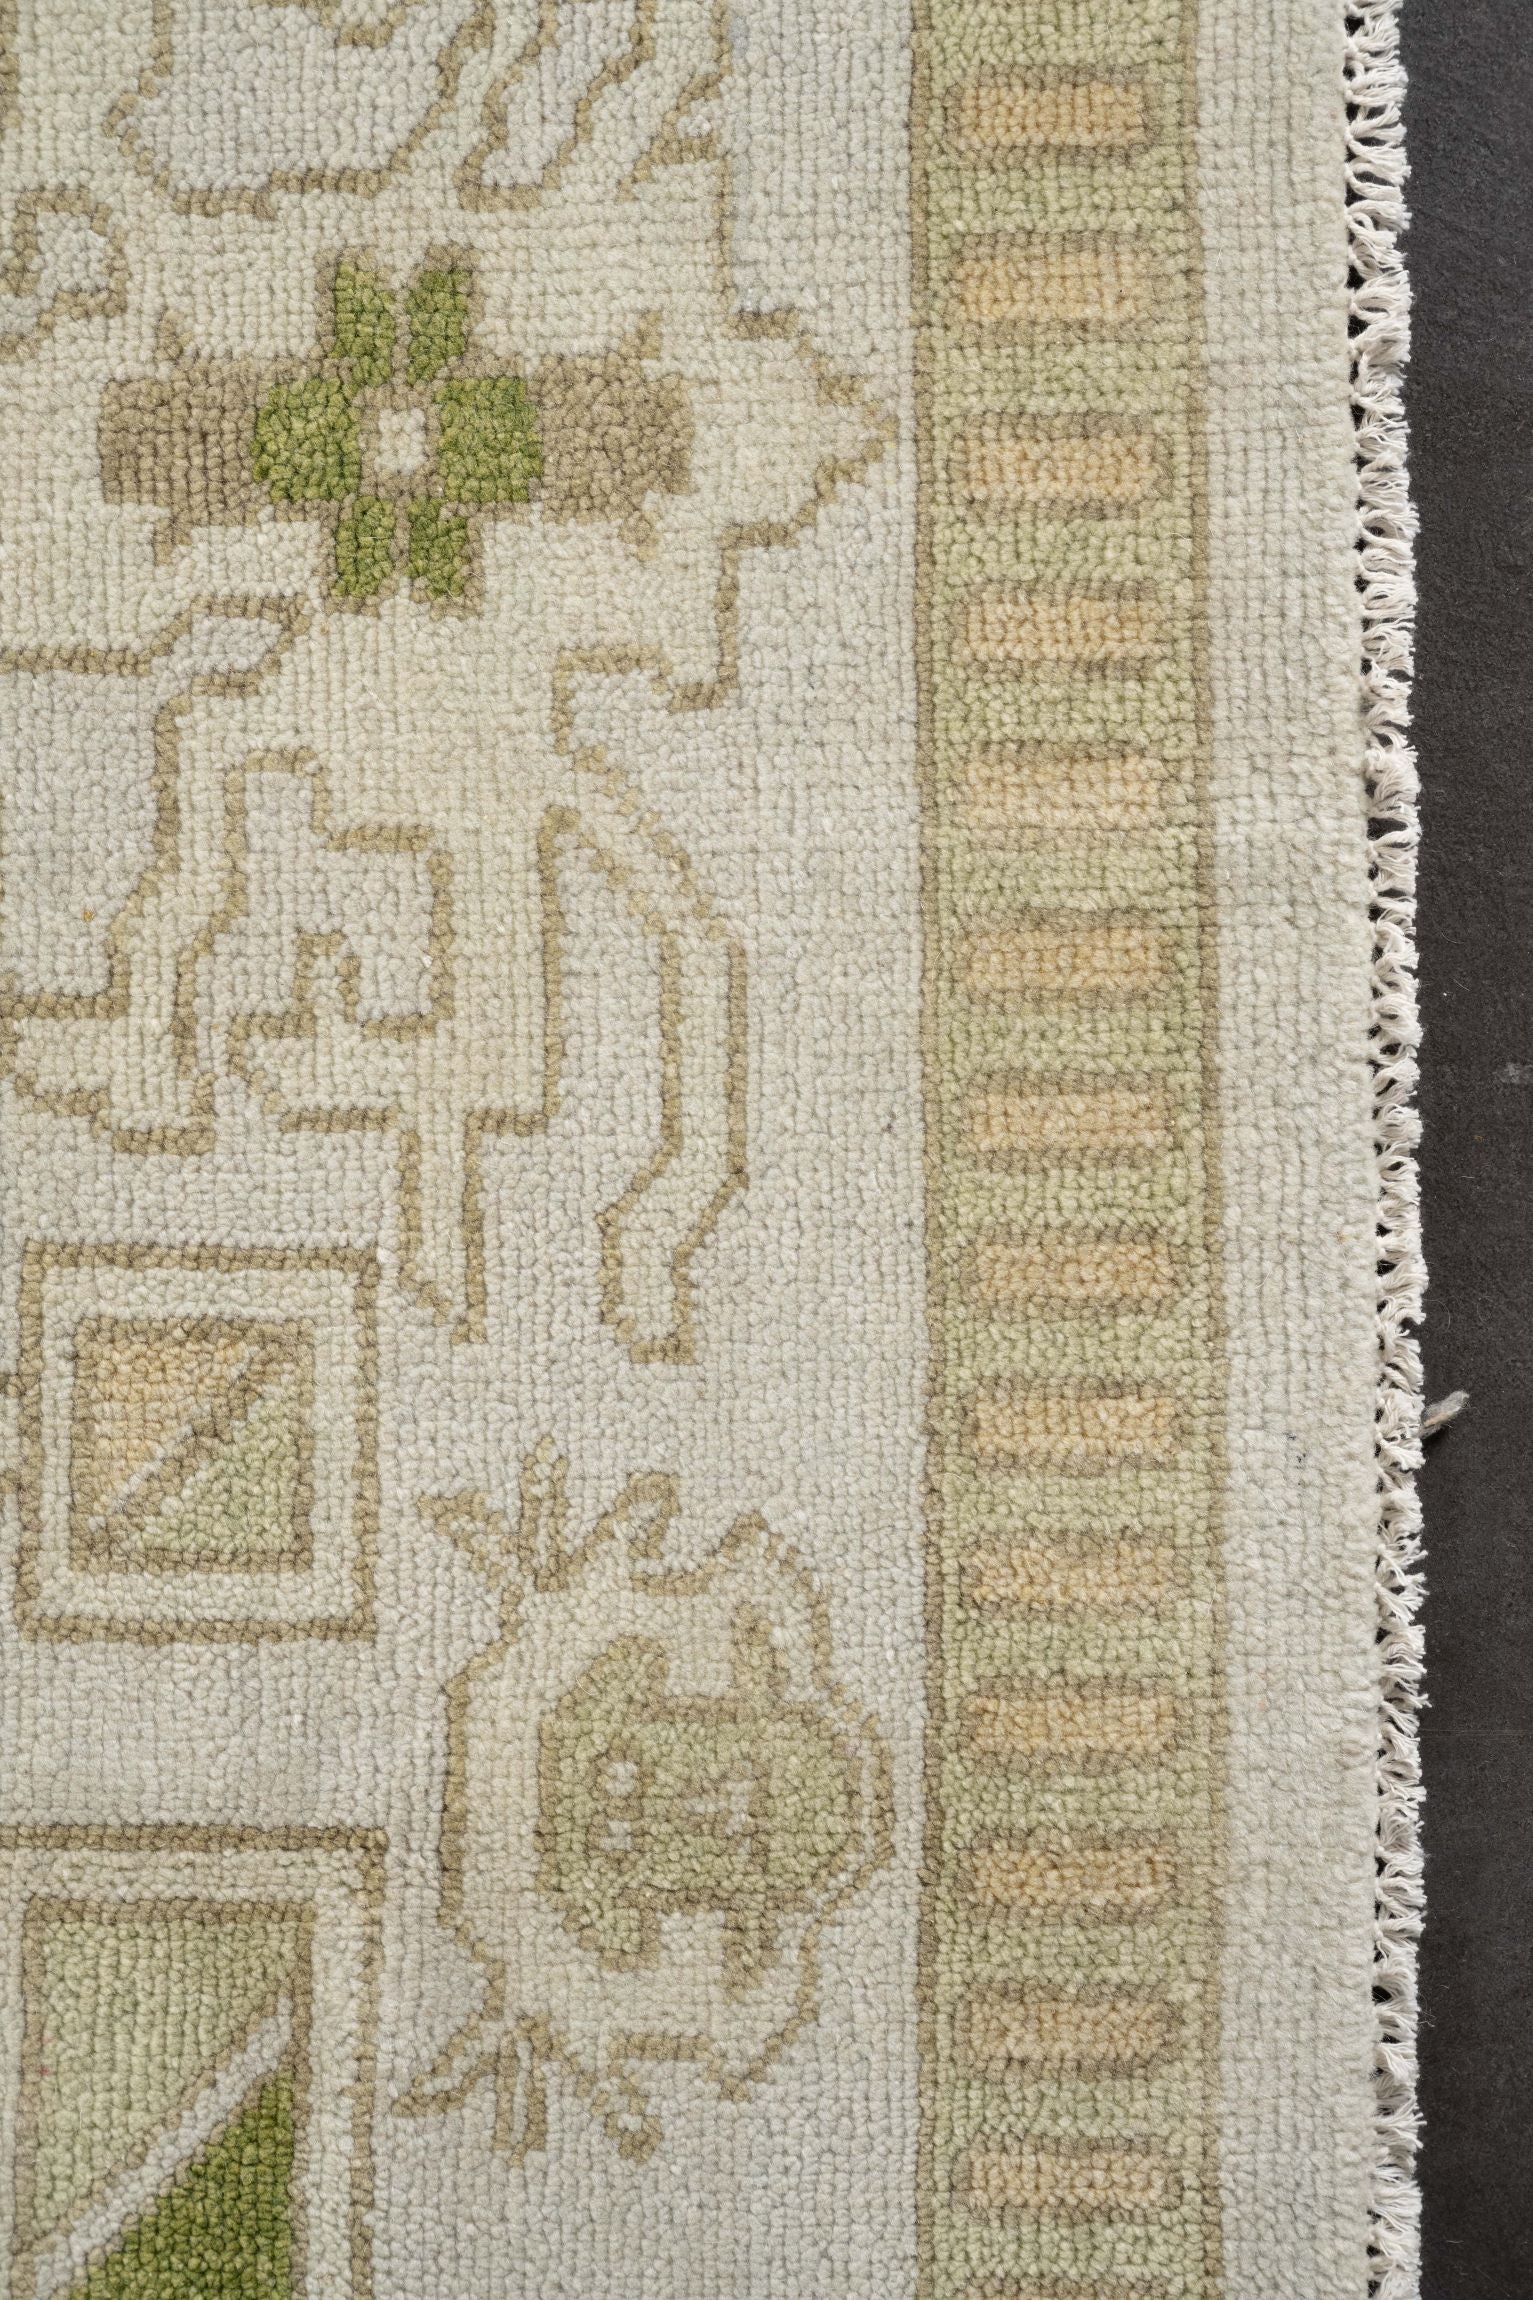 Neutral toned and hand-knotted Oushak style rug made of 100% New Zealand wool. This rug is comprised of green, beige, tan, ivory, brown, lime green, and gray colors.